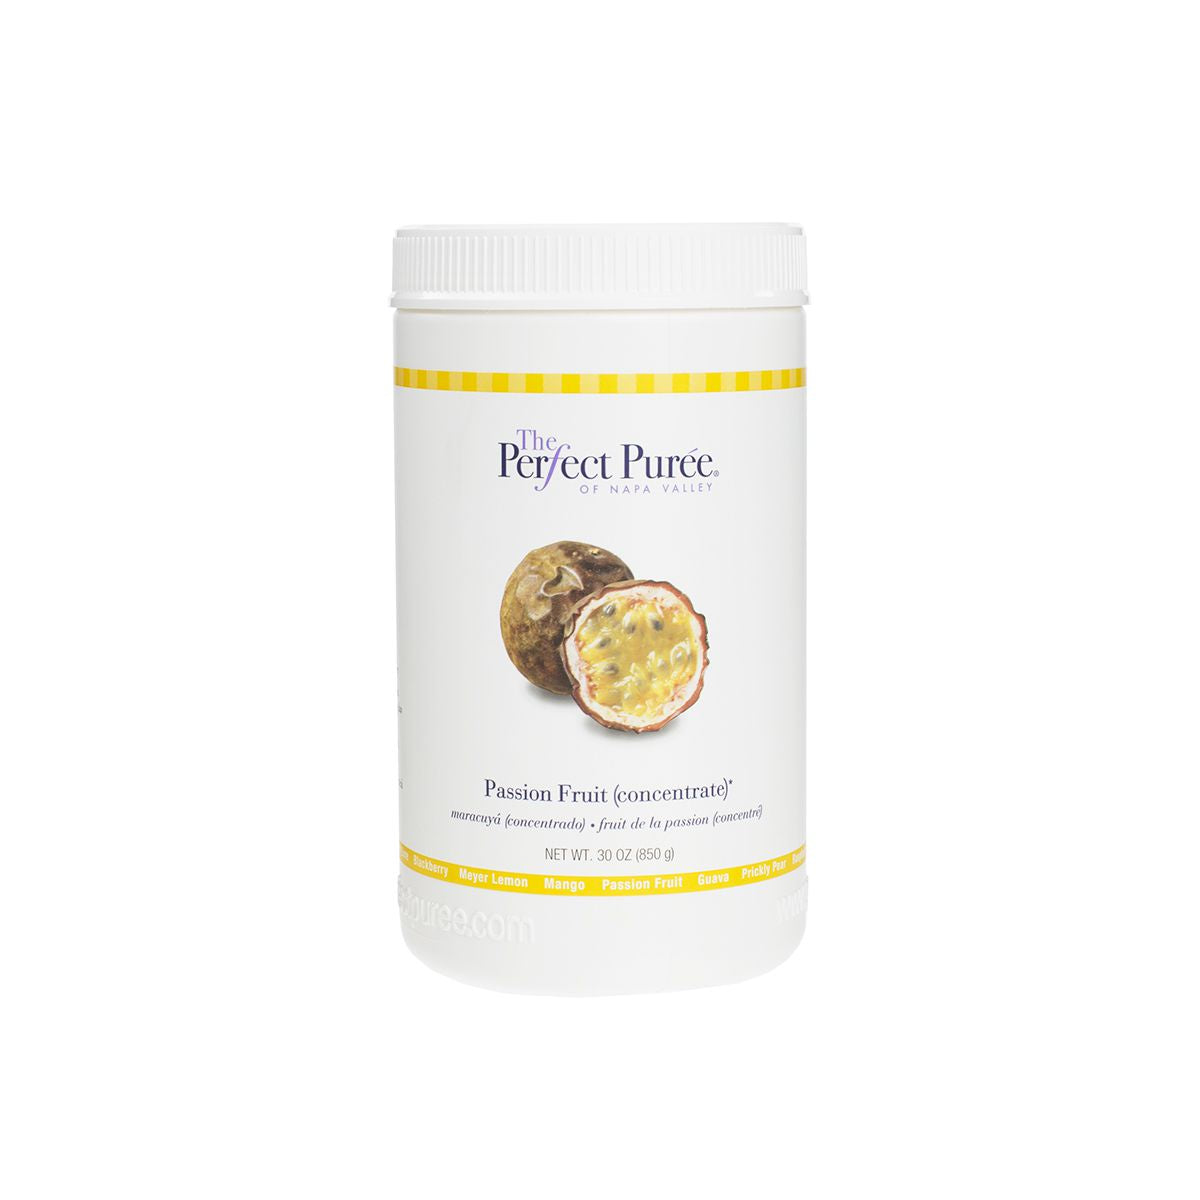 The Perfect Puree Passion Fruit Concentrate